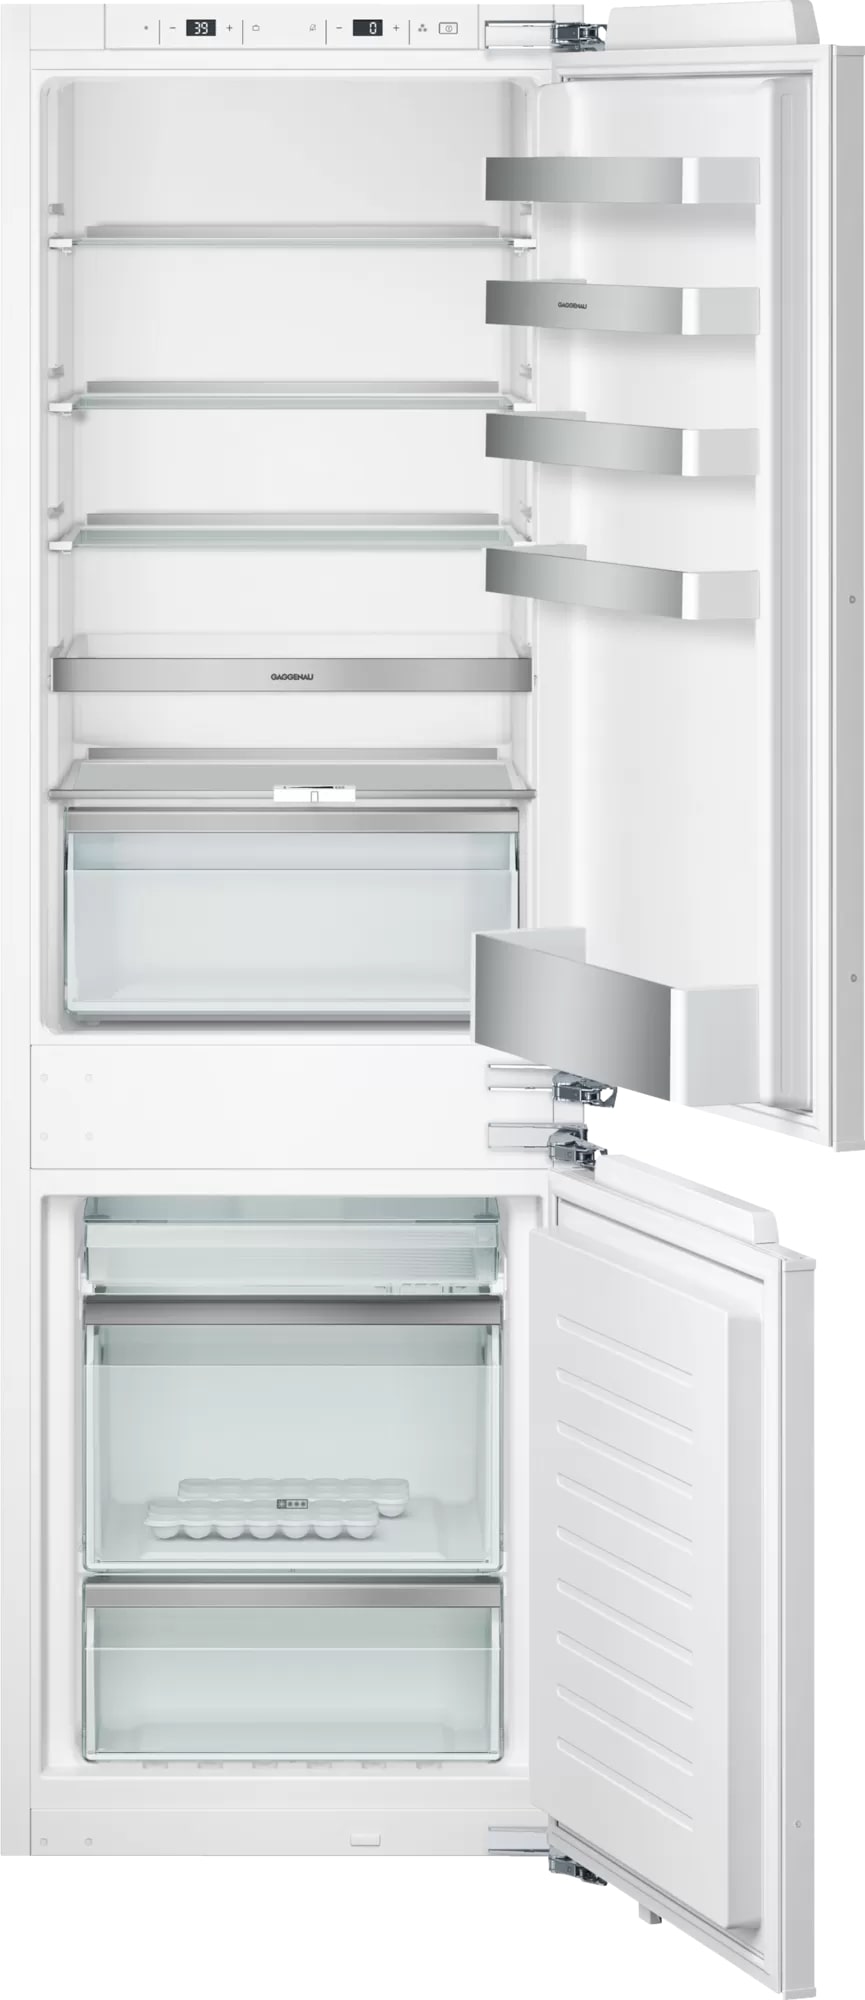 Gaggenau - 22 Inch 9.6 cu. ft Built In / Integrated Bottom Mount Refrigerator in Panel Ready - RB280703